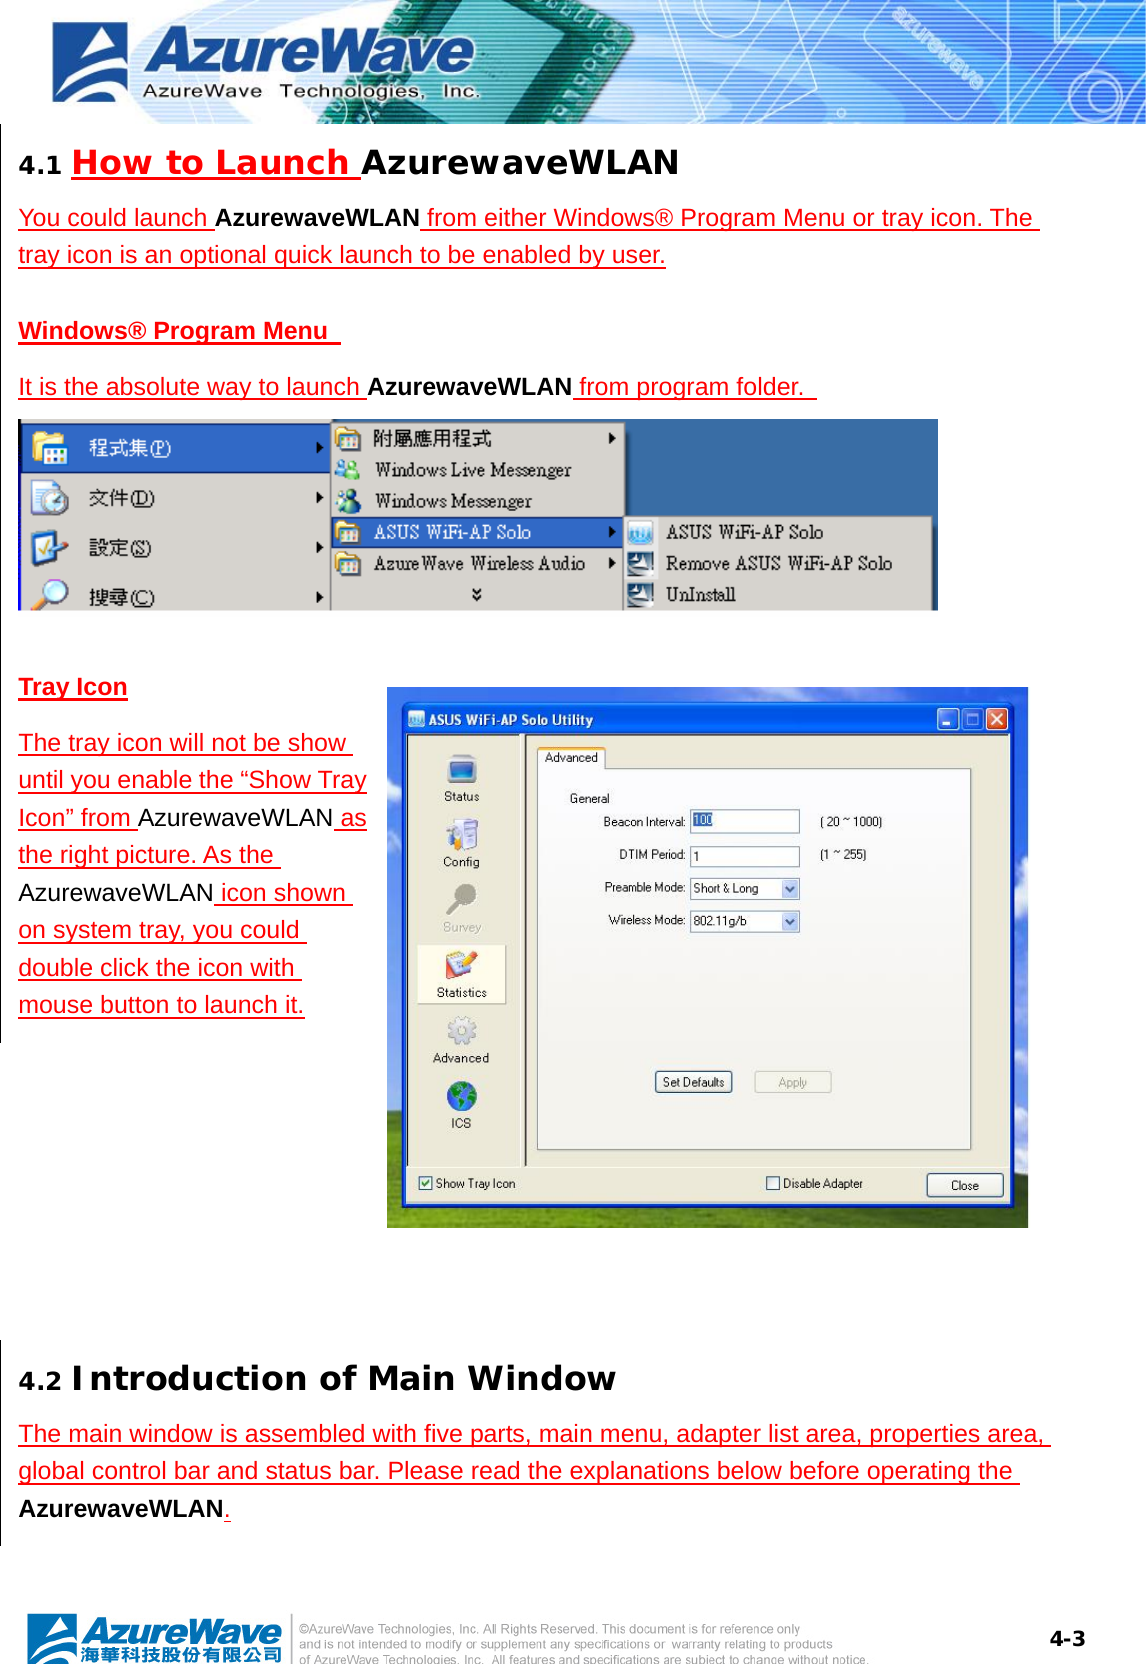  4-34.1 How to Launch AzurewaveWLAN You could launch AzurewaveWLAN from either Windows® Program Menu or tray icon. The tray icon is an optional quick launch to be enabled by user. Windows® Program Menu   It is the absolute way to launch AzurewaveWLAN from program folder.  Tray Icon The tray icon will not be show until you enable the “Show Tray Icon” from AzurewaveWLAN as the right picture. As the AzurewaveWLAN icon shown on system tray, you could double click the icon with mouse button to launch it.  4.2 Introduction of Main Window The main window is assembled with five parts, main menu, adapter list area, properties area, global control bar and status bar. Please read the explanations below before operating the AzurewaveWLAN. 